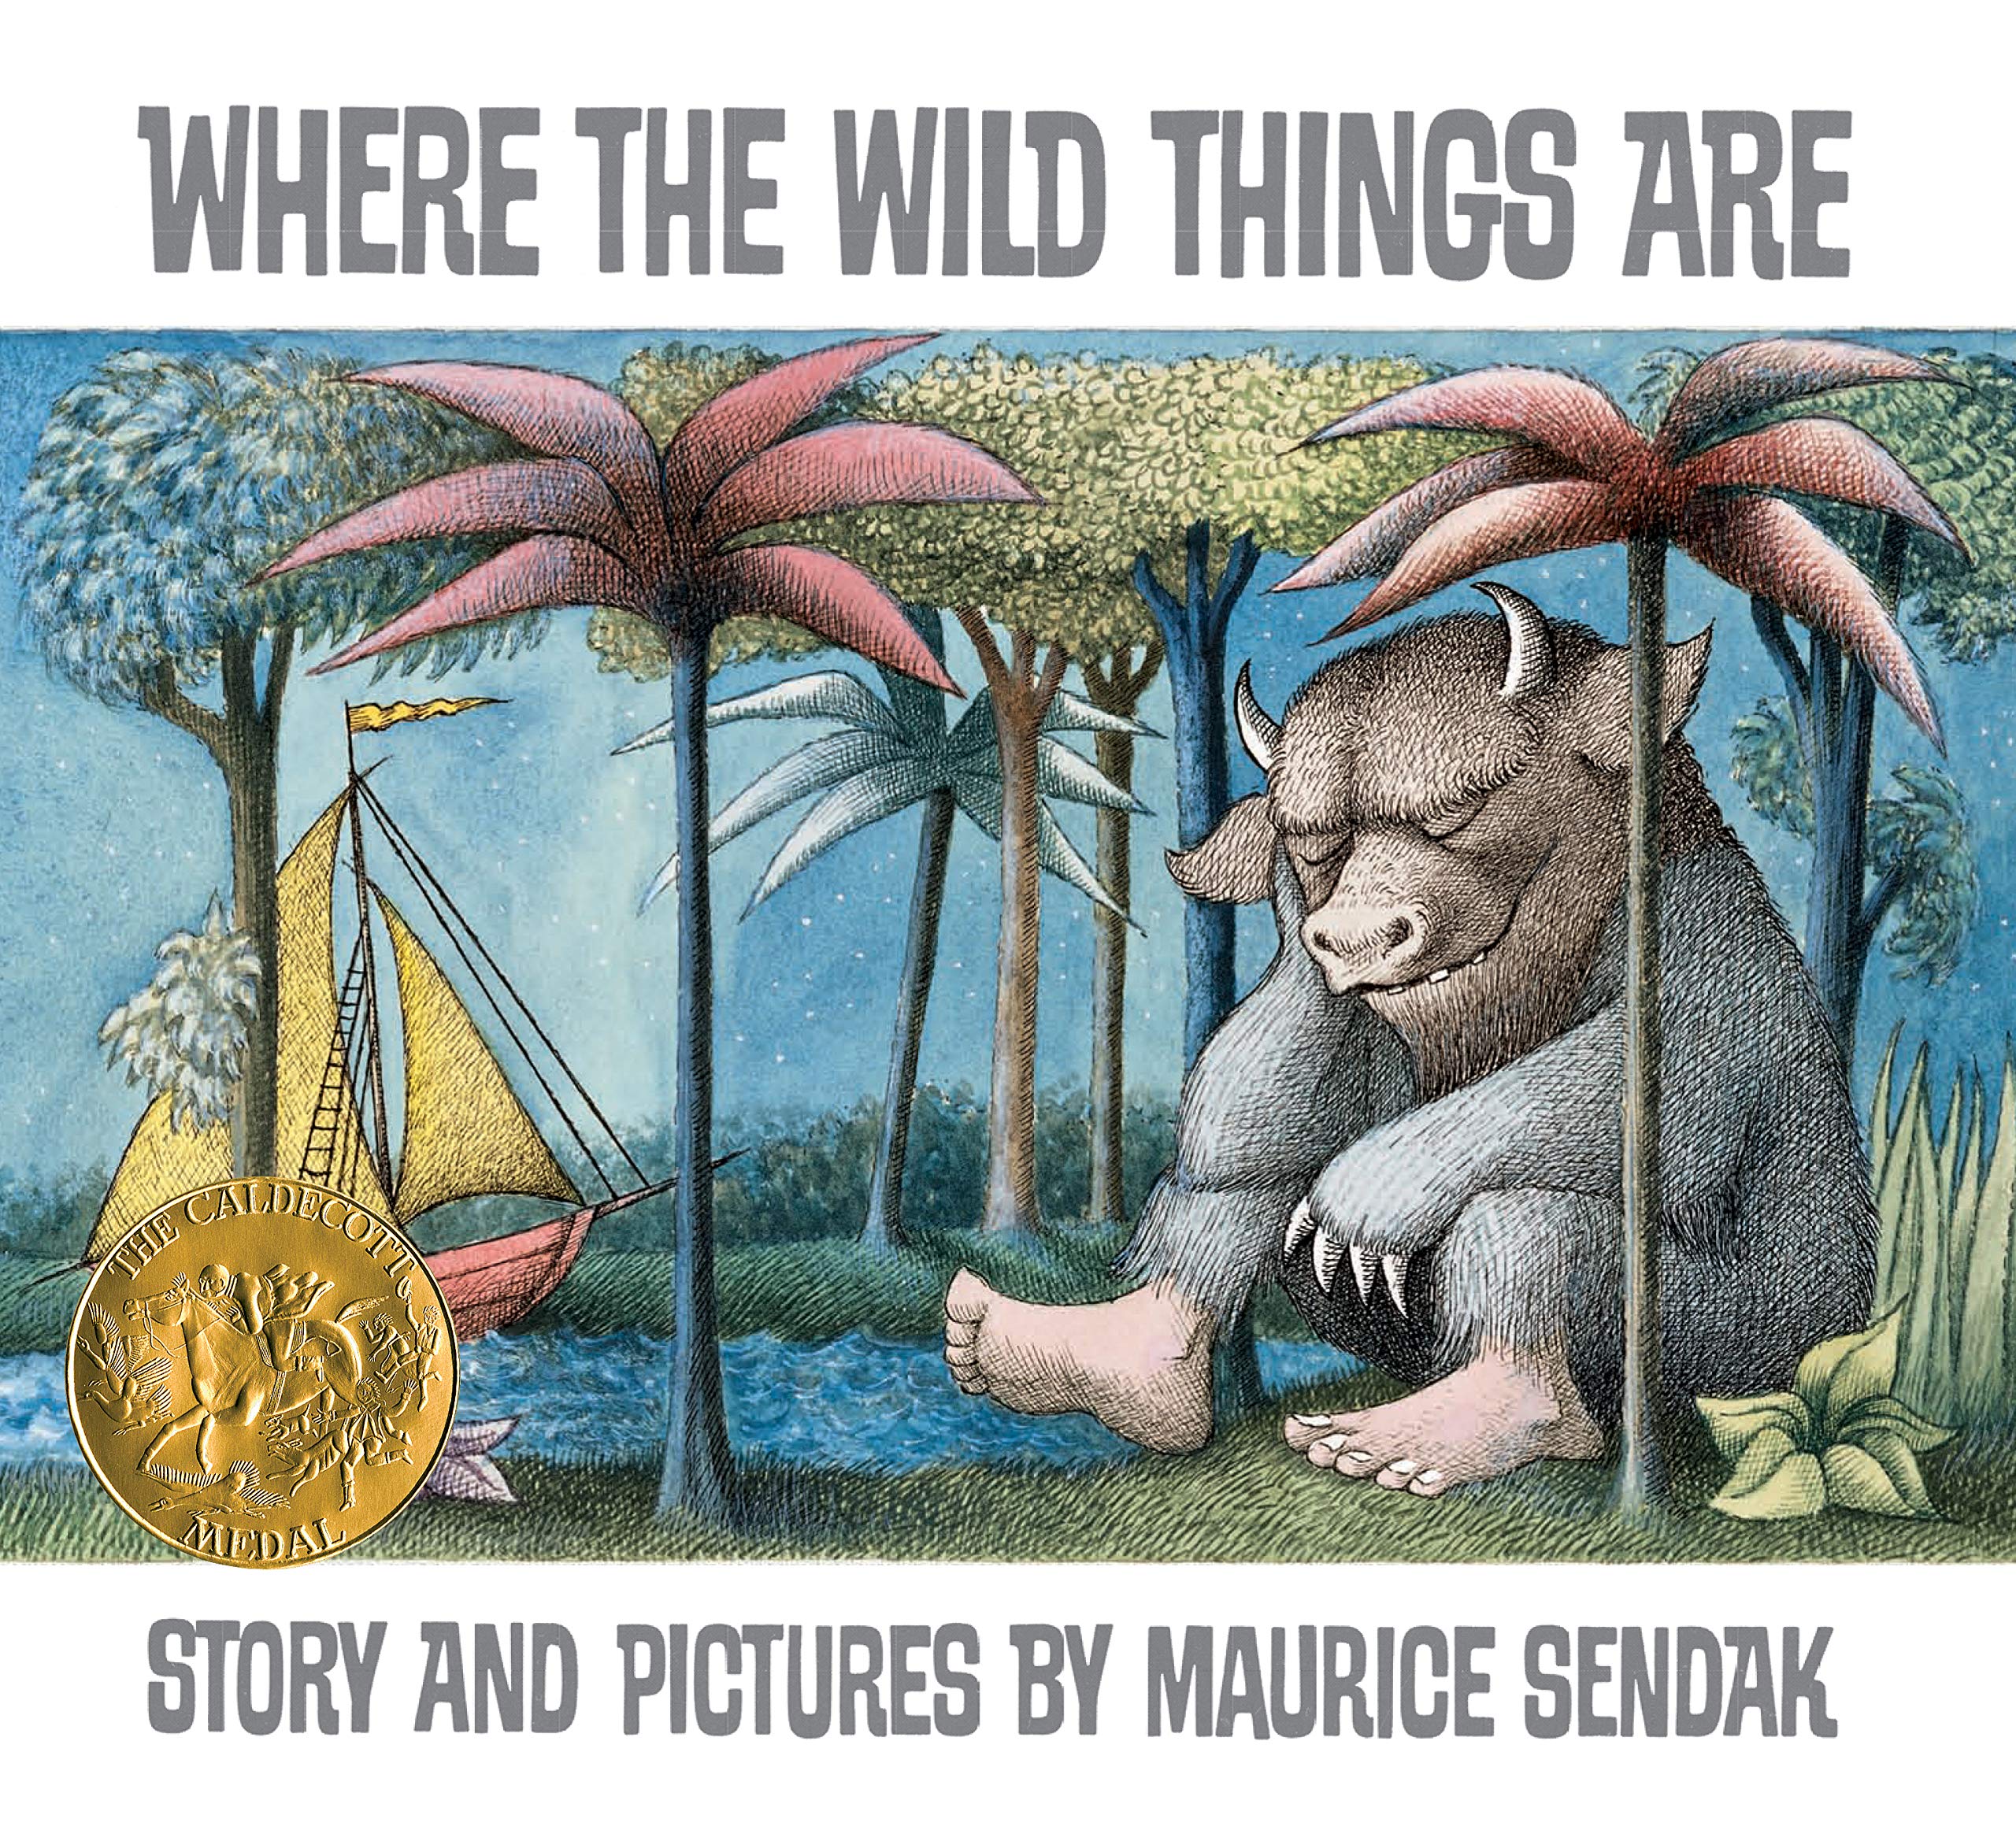 Image for "Where the Wild Things Are"